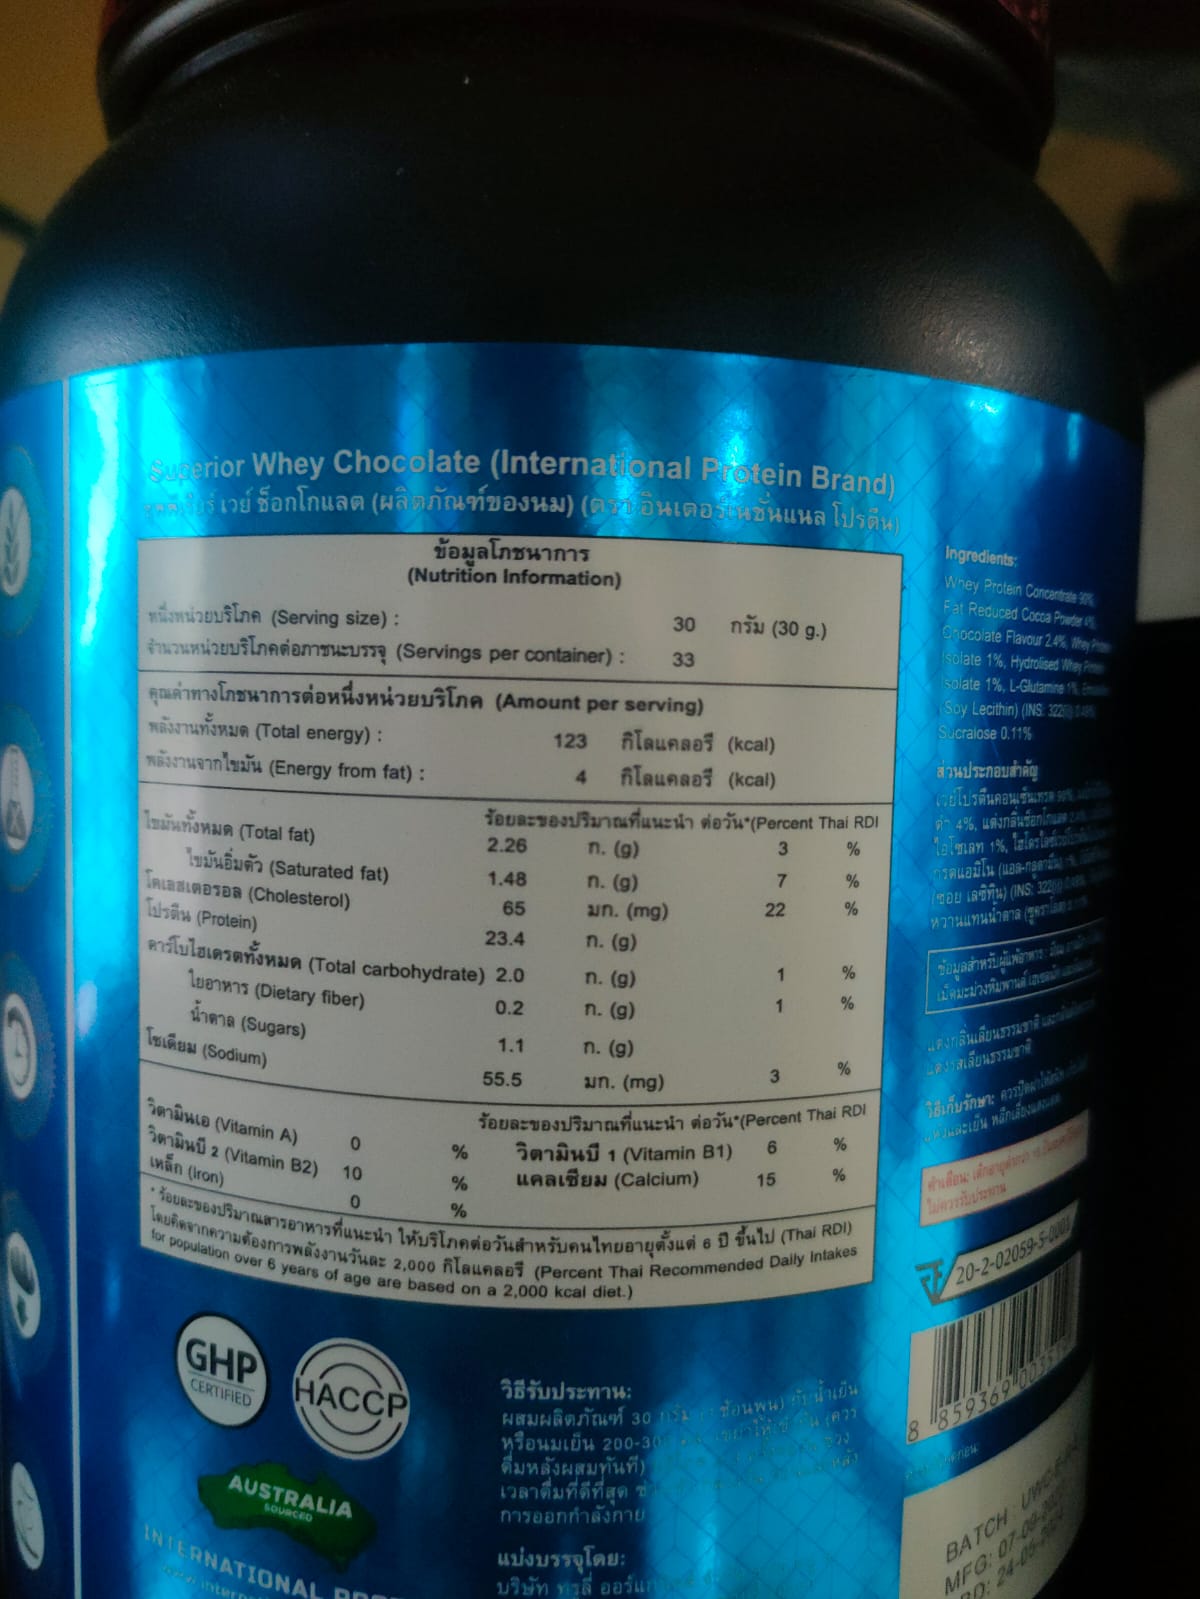 Interational-Protein-Whey-Chocolate-Nutrition-Label